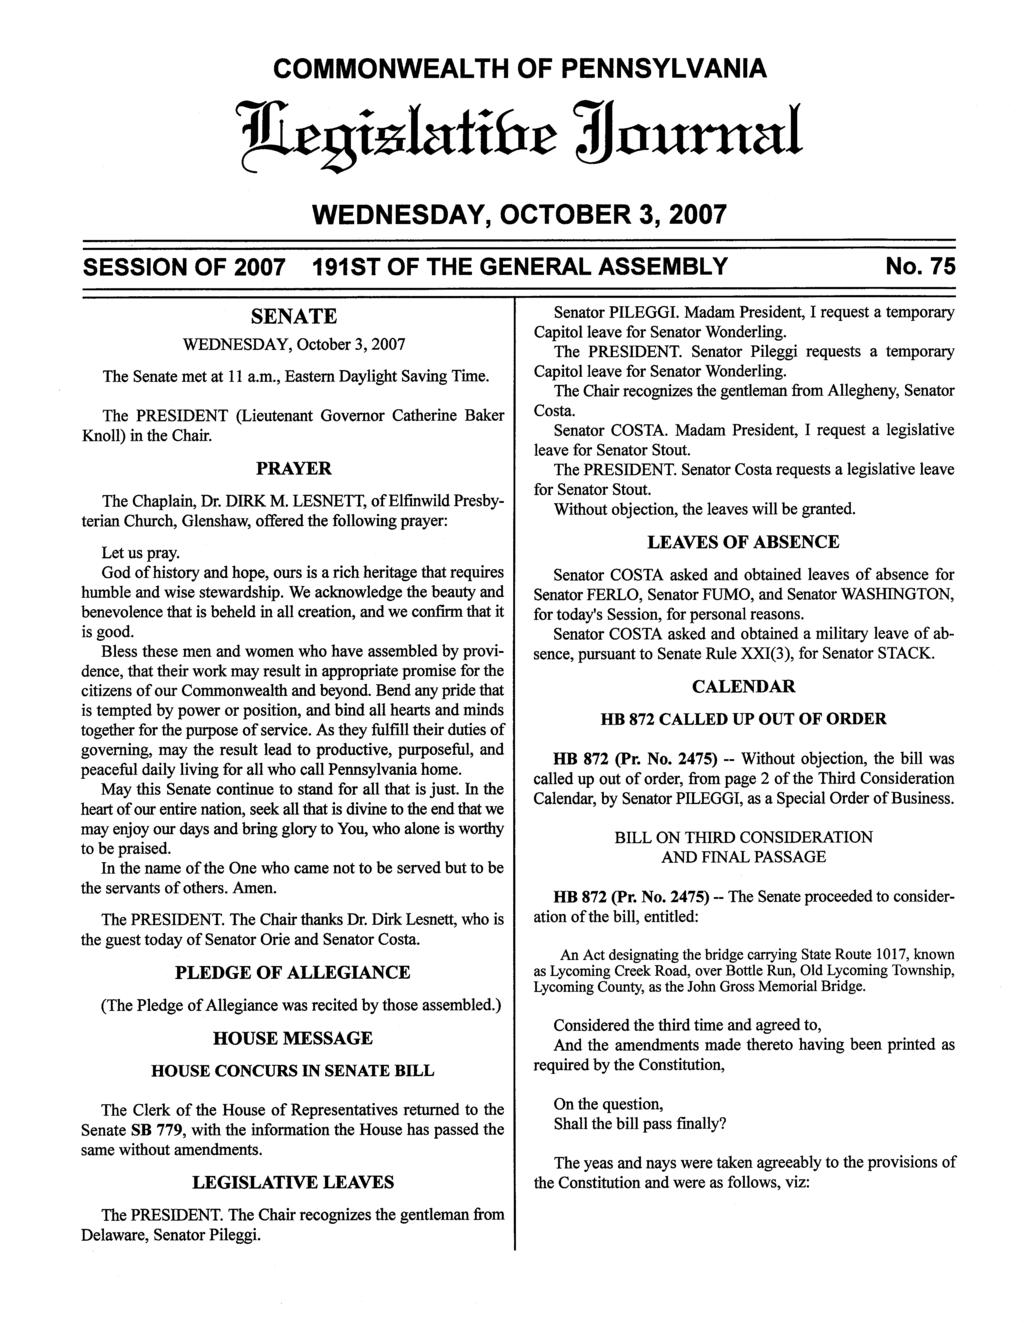 COMMONWEALTH OF PENNSYLVANIA iirfziafibr jnurrnd WEDNESDAY, OCTOBER 3, 2007 SESSION OF 2007 191ST OF THE GENERAL ASSEMBLY No. 75 SENATE WEDNESDAY, October 3, 2007 The Senate me